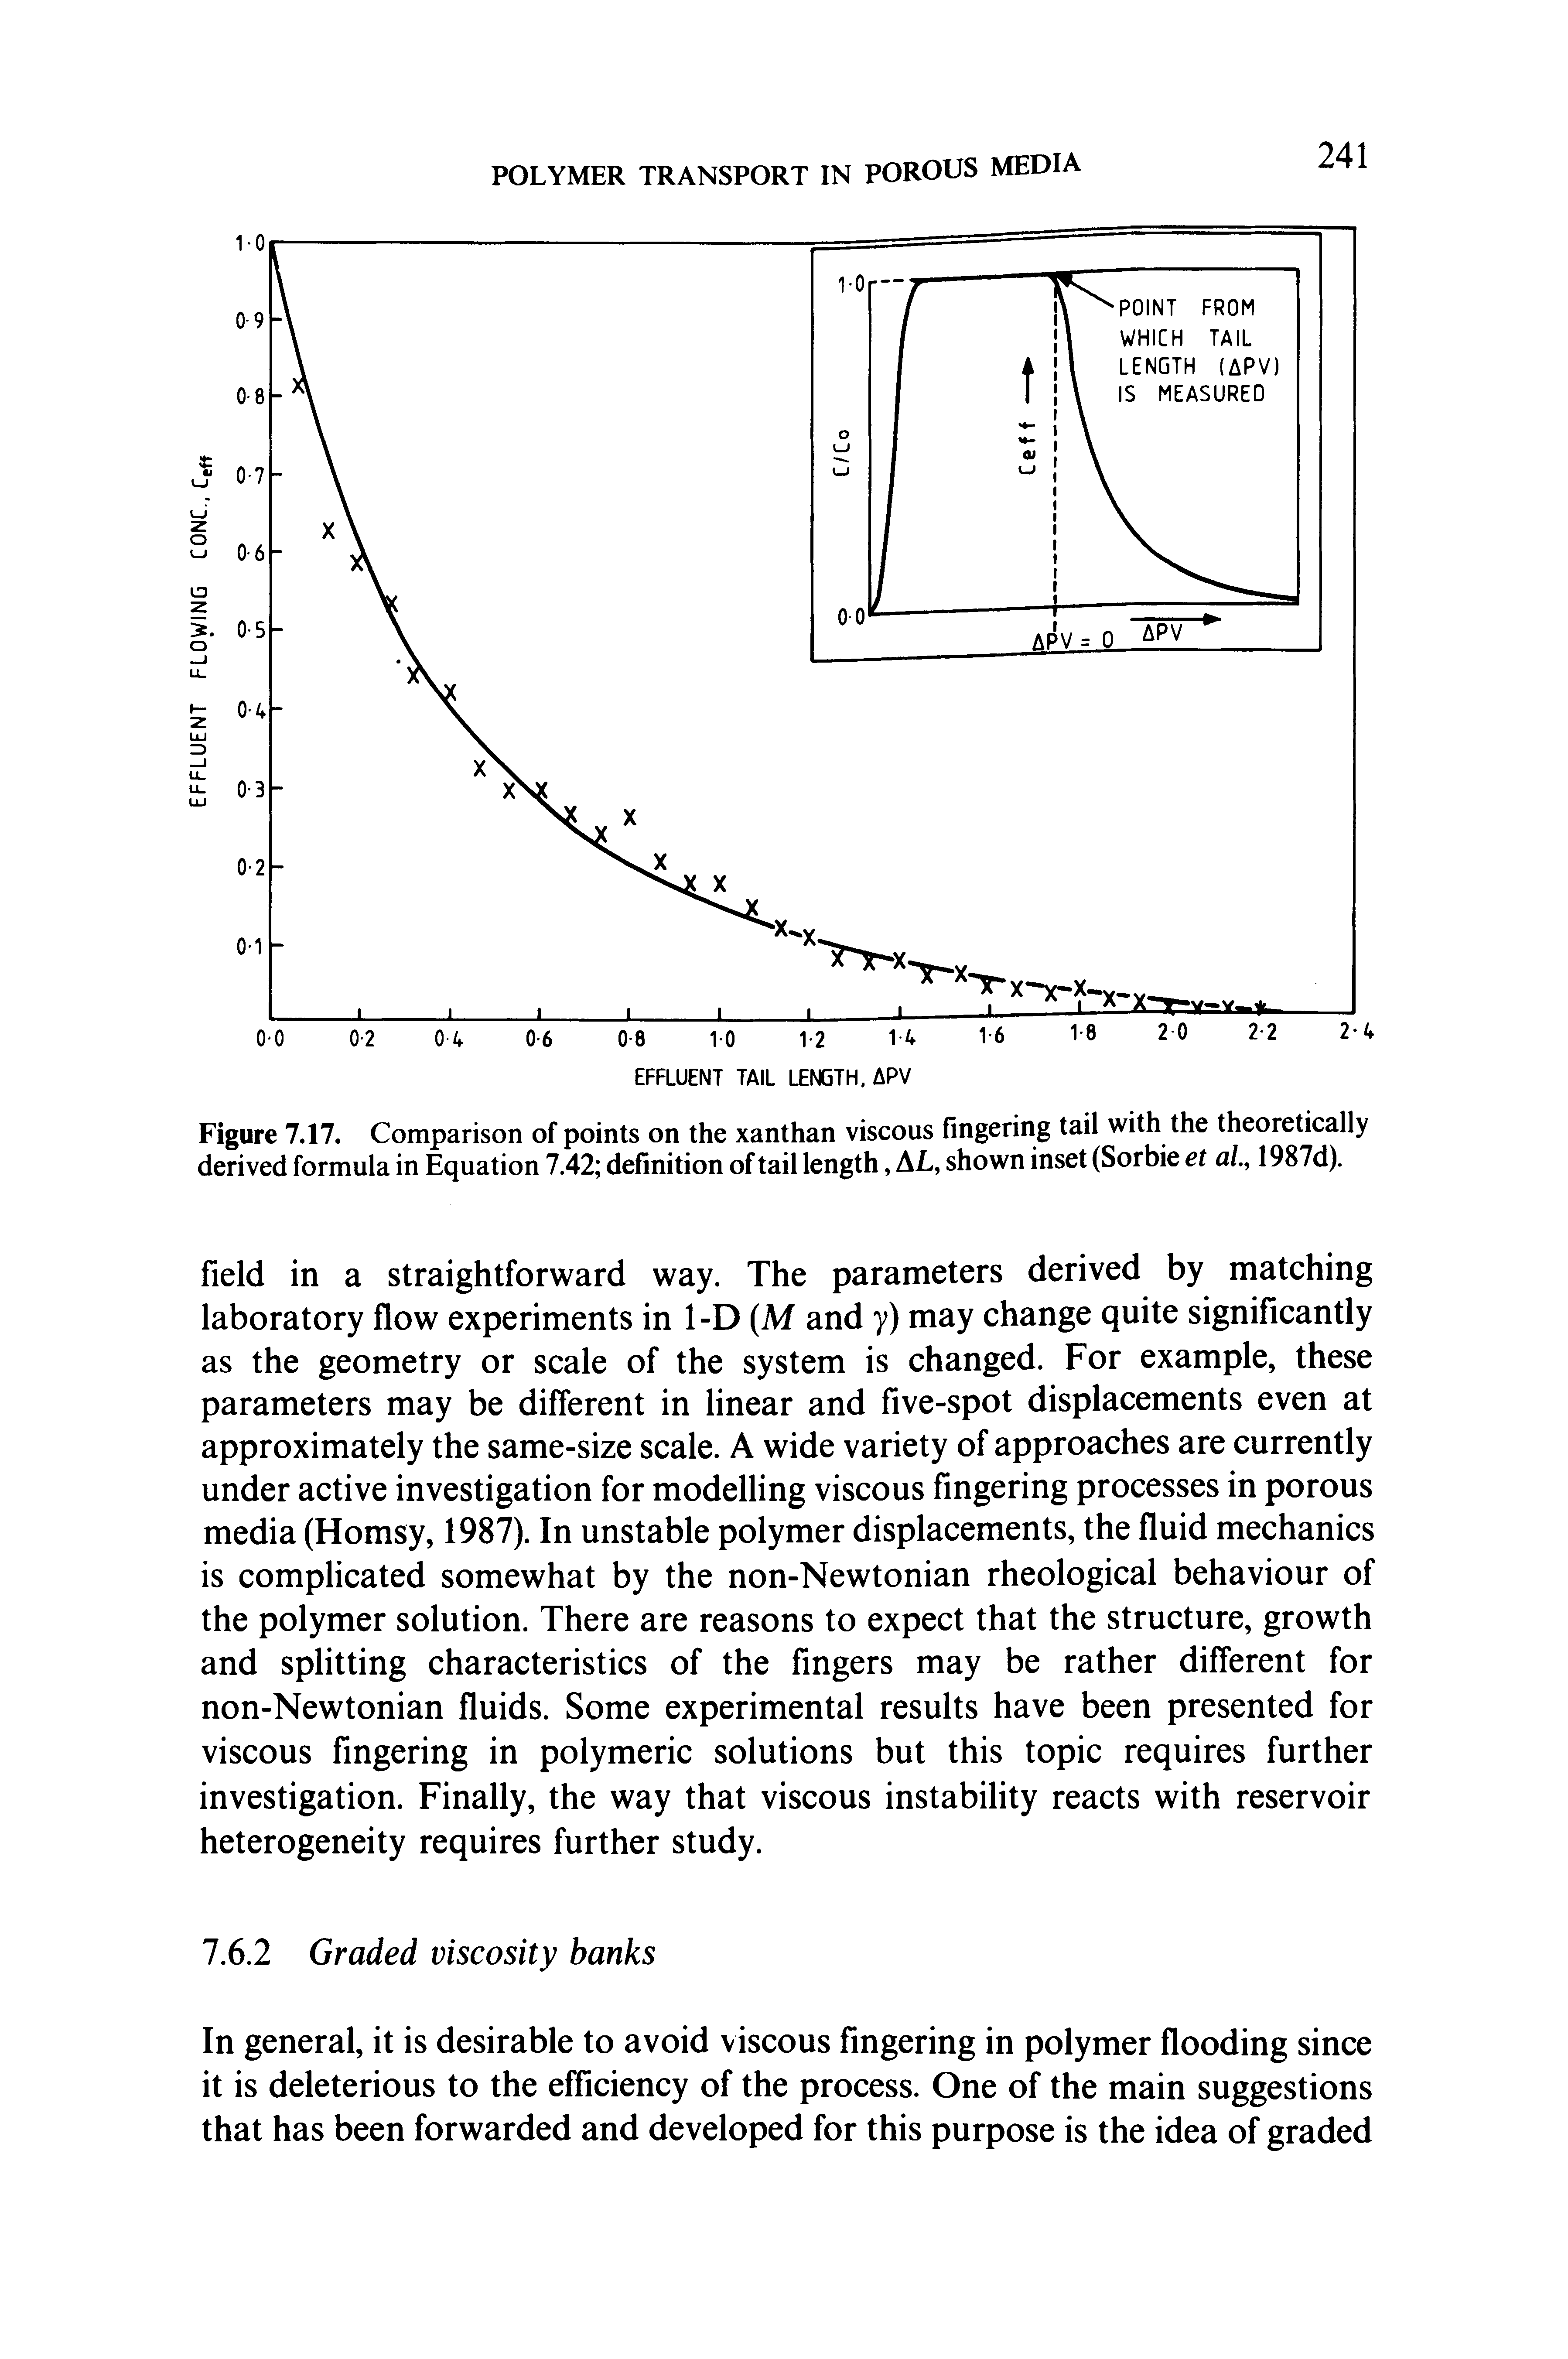 Figure 7.17. Comparison of points on the xanthan viscous fingering tail with the theoretolly derived formula in Equation 7.42 definition of tail length, AL, shown inset (Sorbie et al, 1987d).